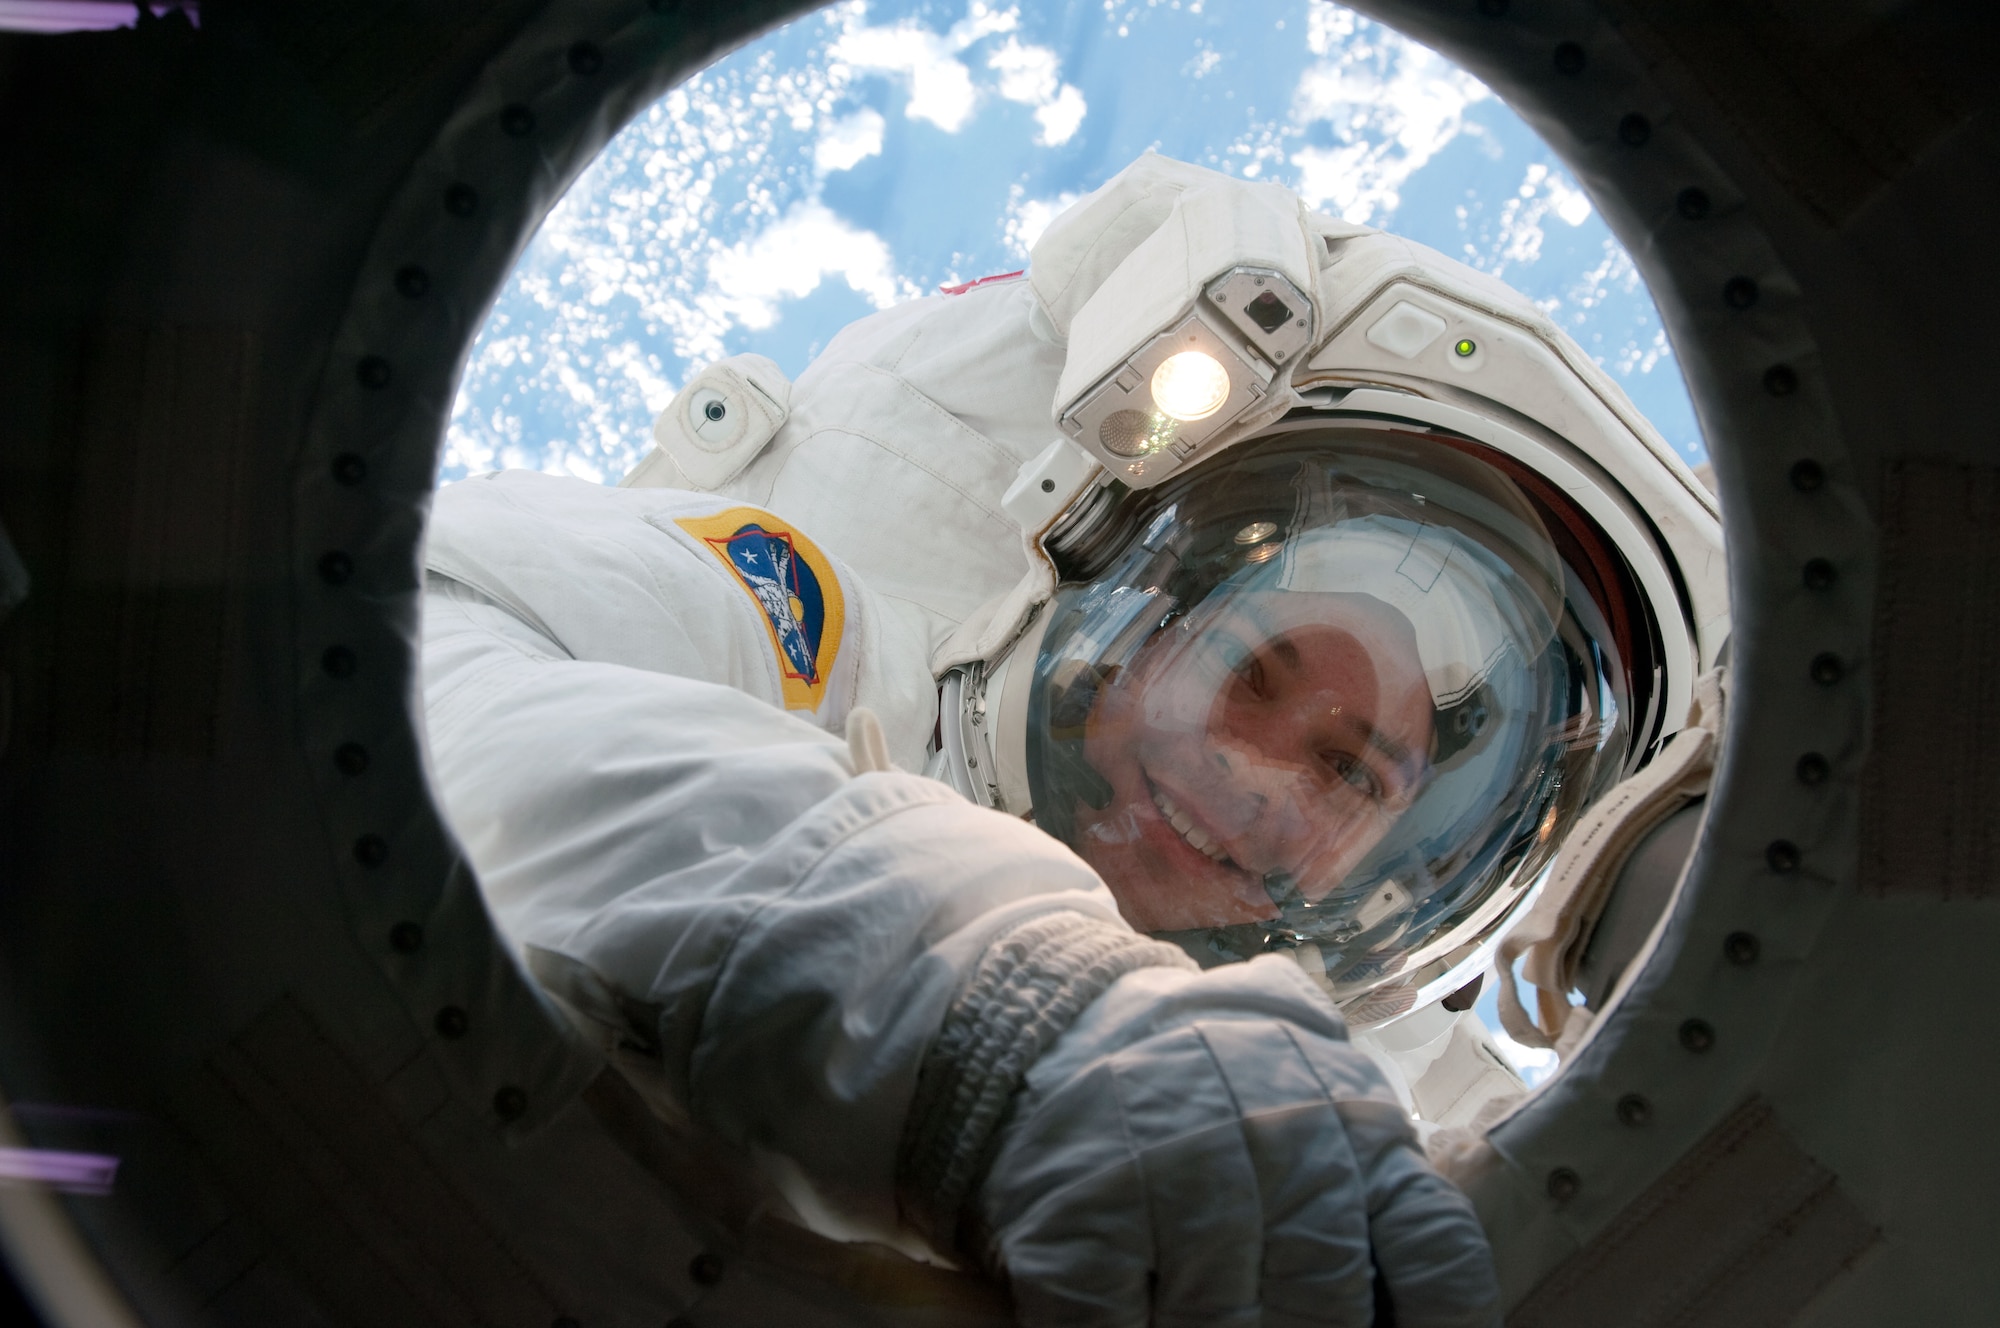 NASA astronaut Robert Behnken, STS-130 mission specialist, takes a break in the mission's second session of extravehicular activity (EVA) for construction and maintenance on the International Space Station in February of 2010 to allow air scrubbers to remove CO2 that had built up in his space suit. During the five-hour, 54-minute spacewalk, Behnken and astronaut Nicholas Patrick connected two ammonia coolant loops, installed thermal covers around the ammonia hoses, outfitted the Earth-facing port on the Tranquility node for the relocation of its Cupola, and installed handrails and a vent valve on the new module. (Photo/NASA)